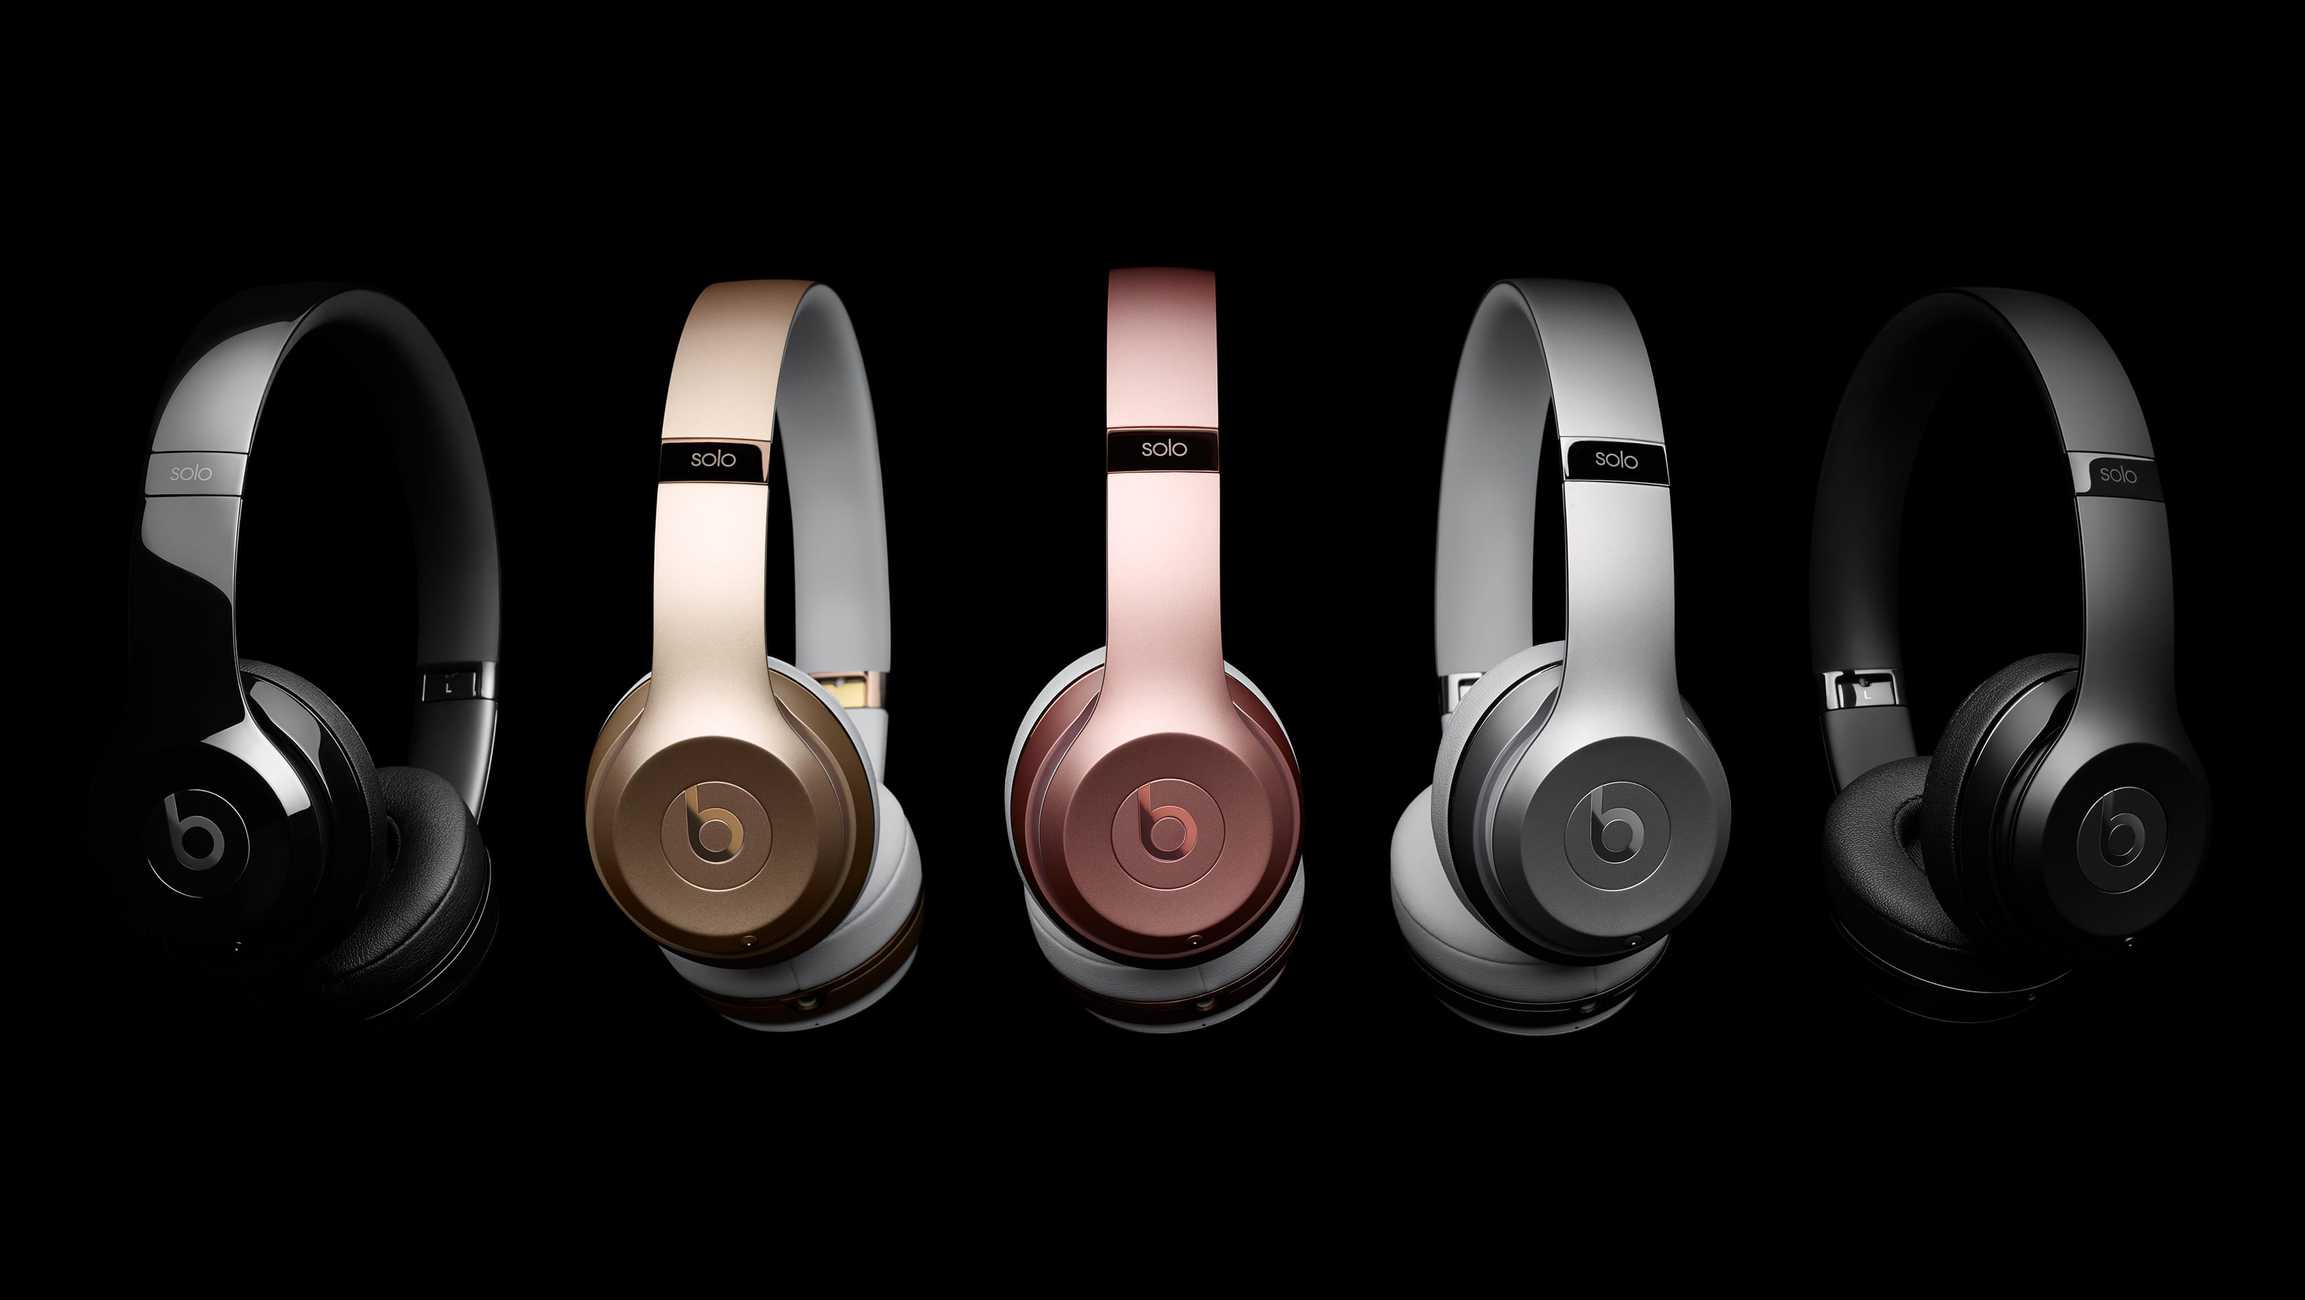 the beats icon collection